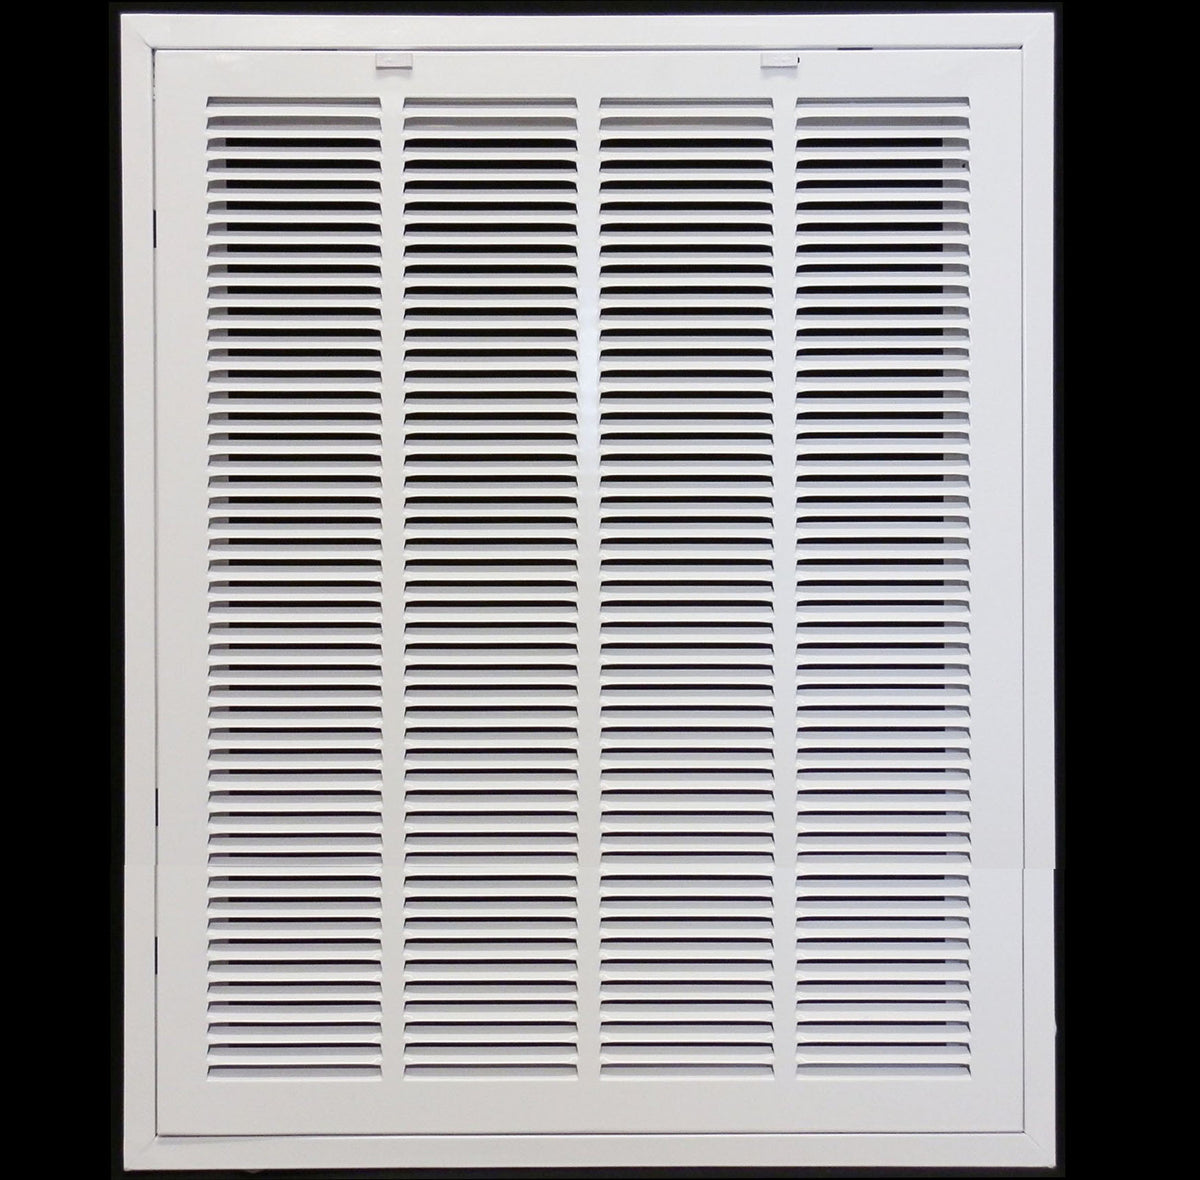 22&quot; X 30&quot; Steel Return Air Filter Grille for 1&quot; Filter - Removable Frame - [Outer Dimensions: 24 5/8&quot; X 32 5/8&quot;]